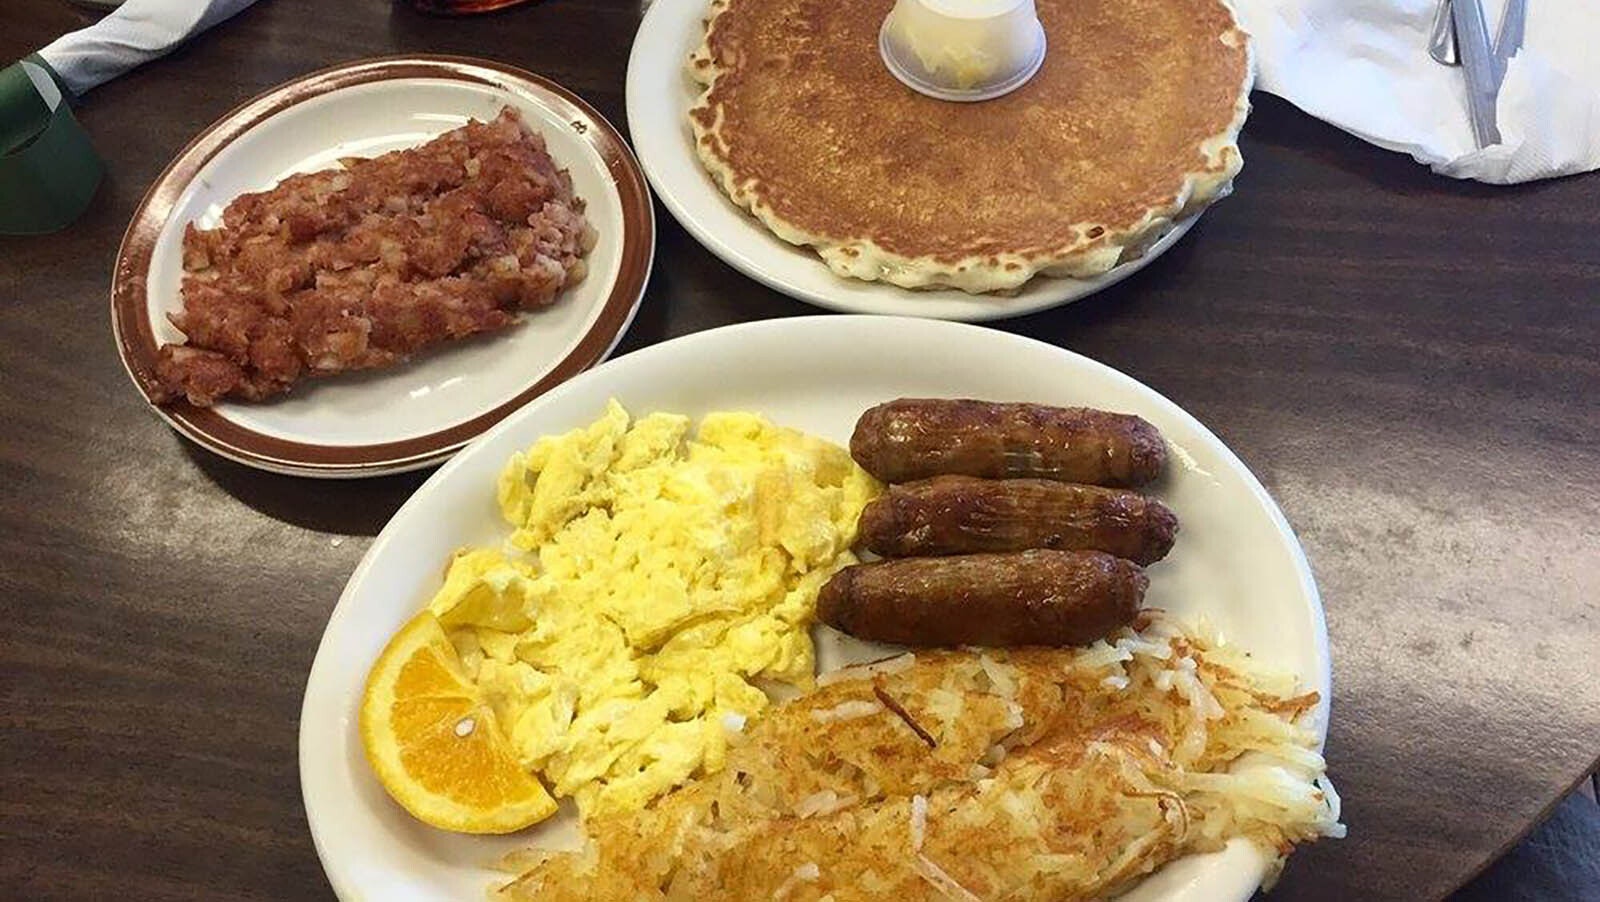 A big breakfast, with pancakes, eggs, hash browns, sausage and hash.